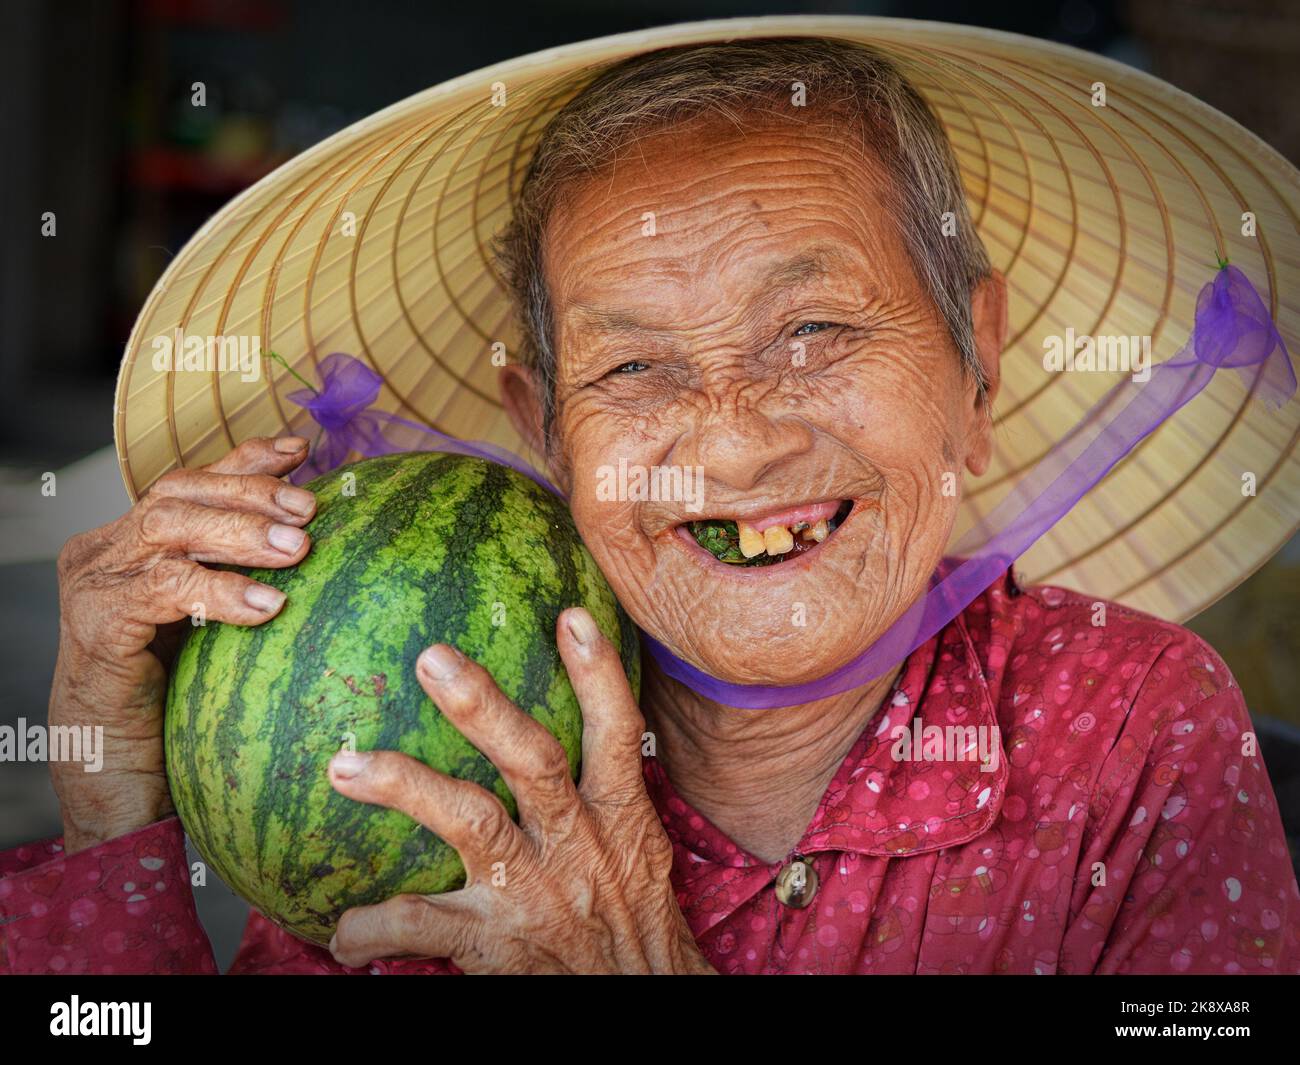 Old Women With Her Watermelon Fruit Elderly Woman Close Up Portrait